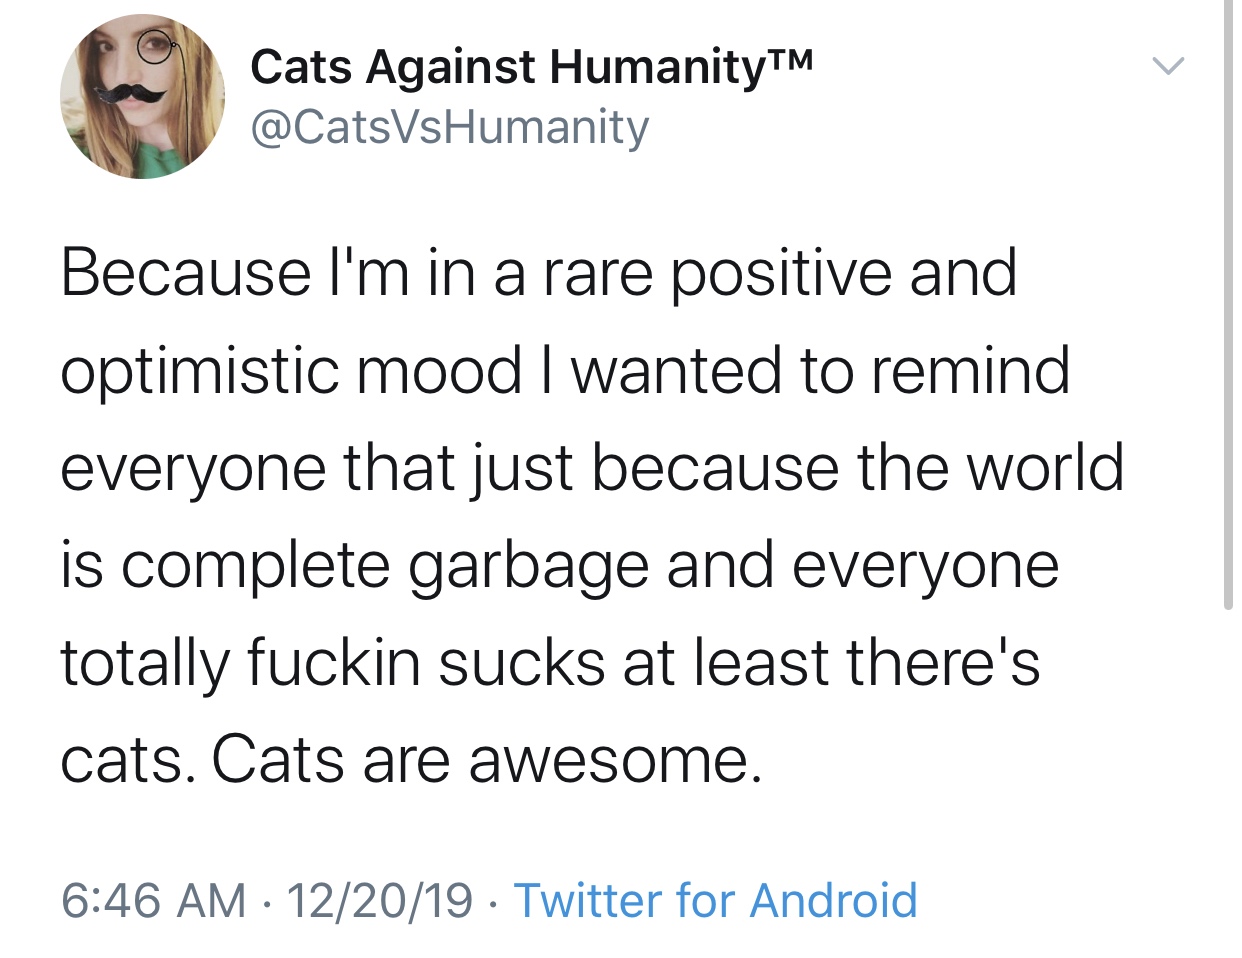 does this man spark joy tweet - Cats Against HumanityTM Because I'm in a rare positive and optimistic mood I wanted to remind everyone that just because the world is complete garbage and everyone totally fuckin sucks at least there's cats. Cats are awesom